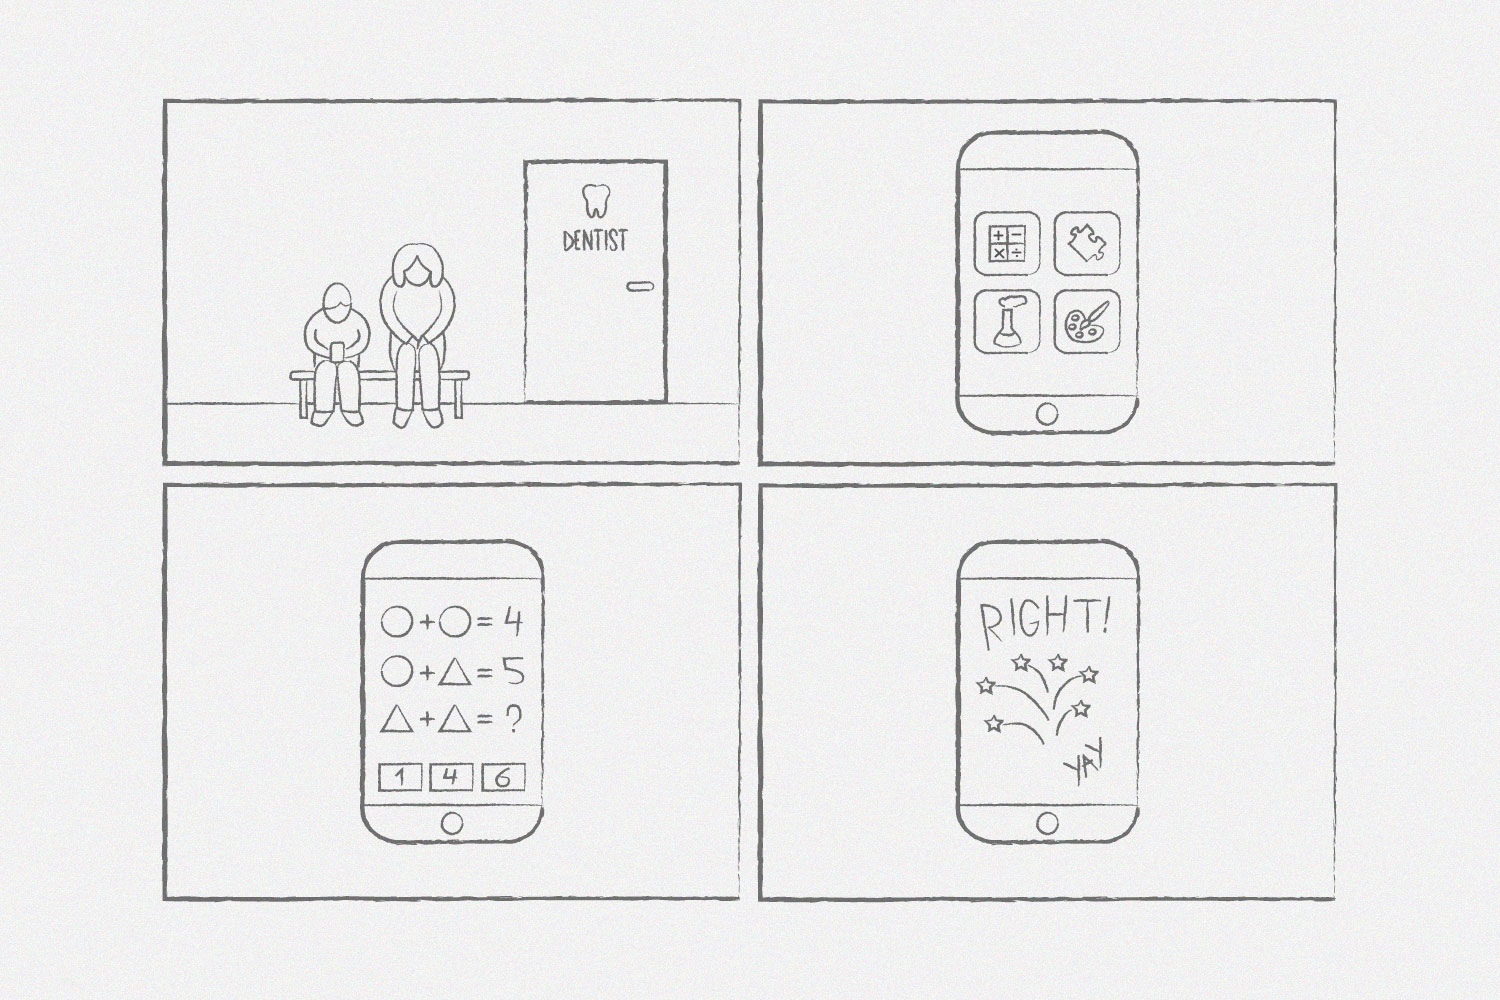 An example of how to storyboard a use case of an app that provides educational content for kids. 